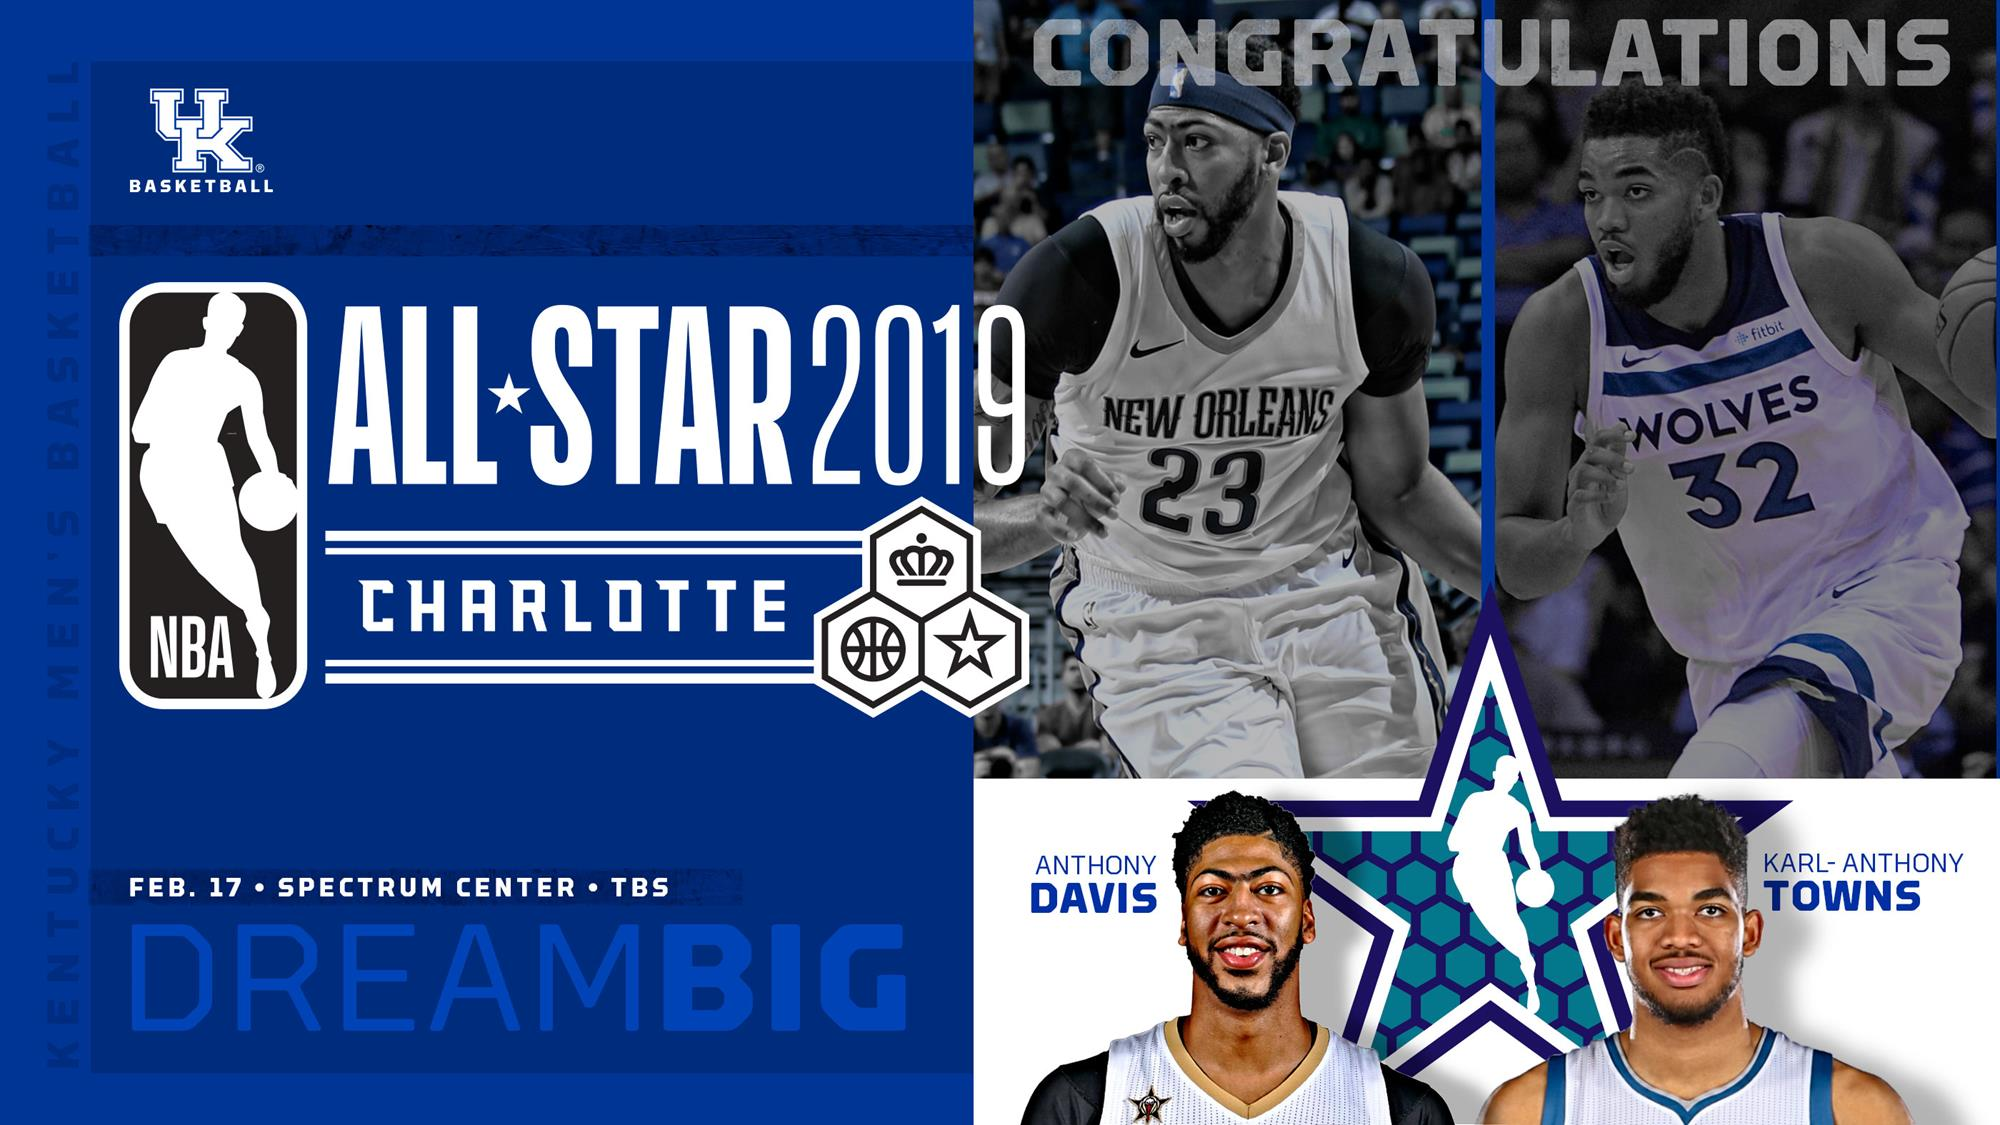 Davis and Towns Selected for the NBA All-Star Game as Reserves